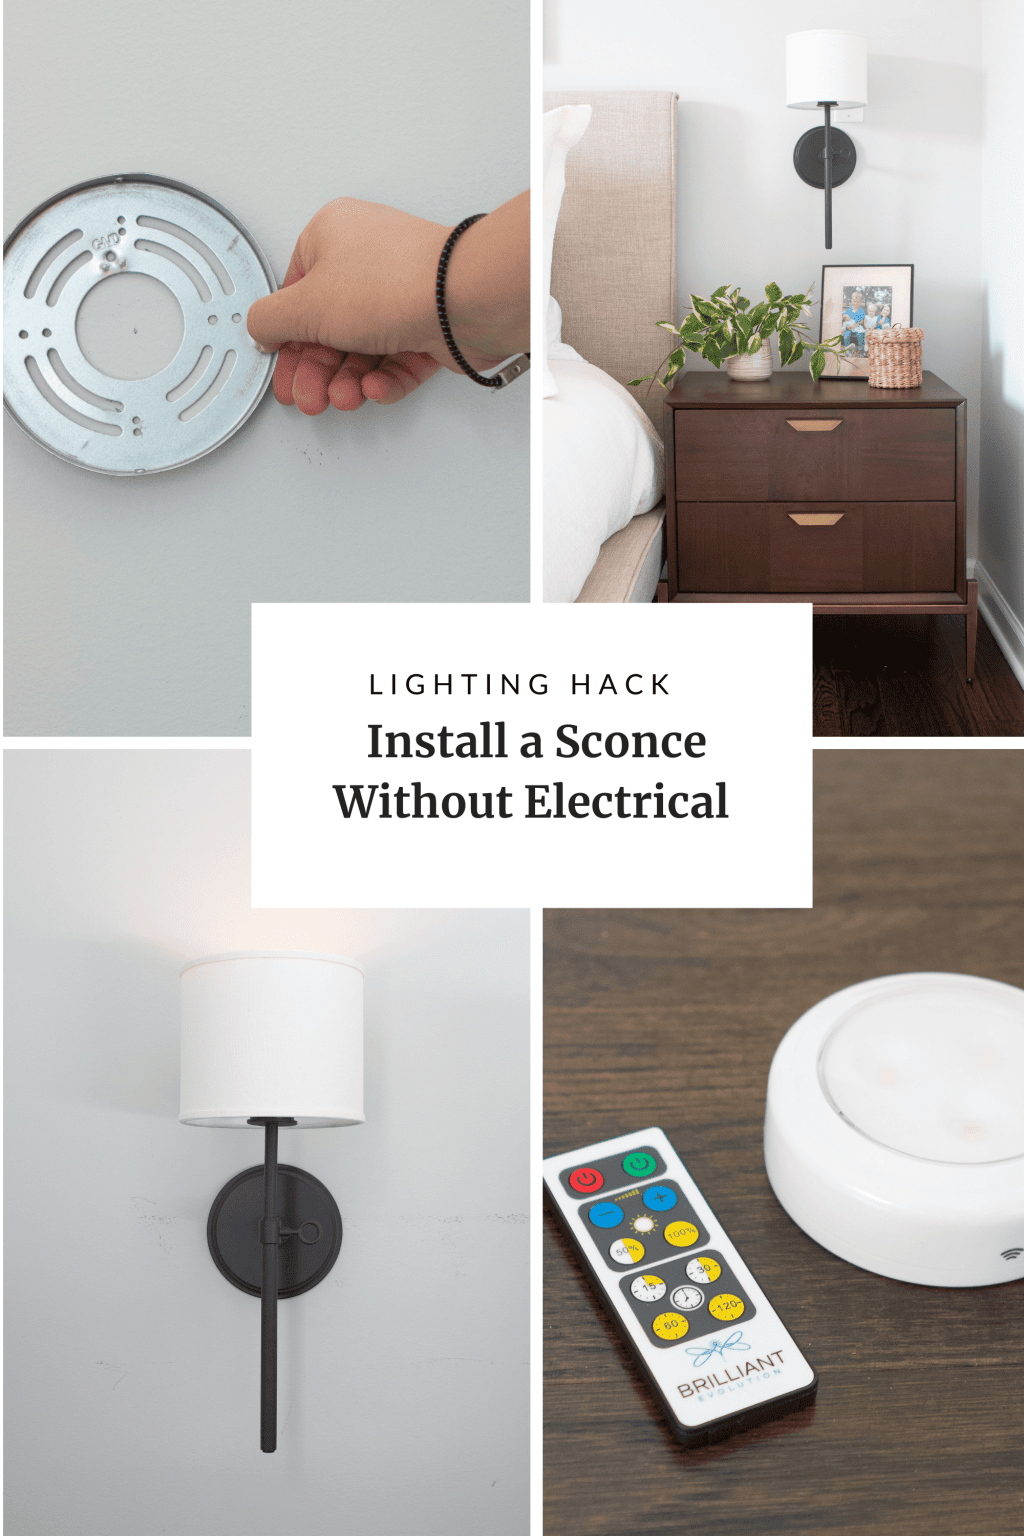 Sconce hack, how to add sconces without electrical